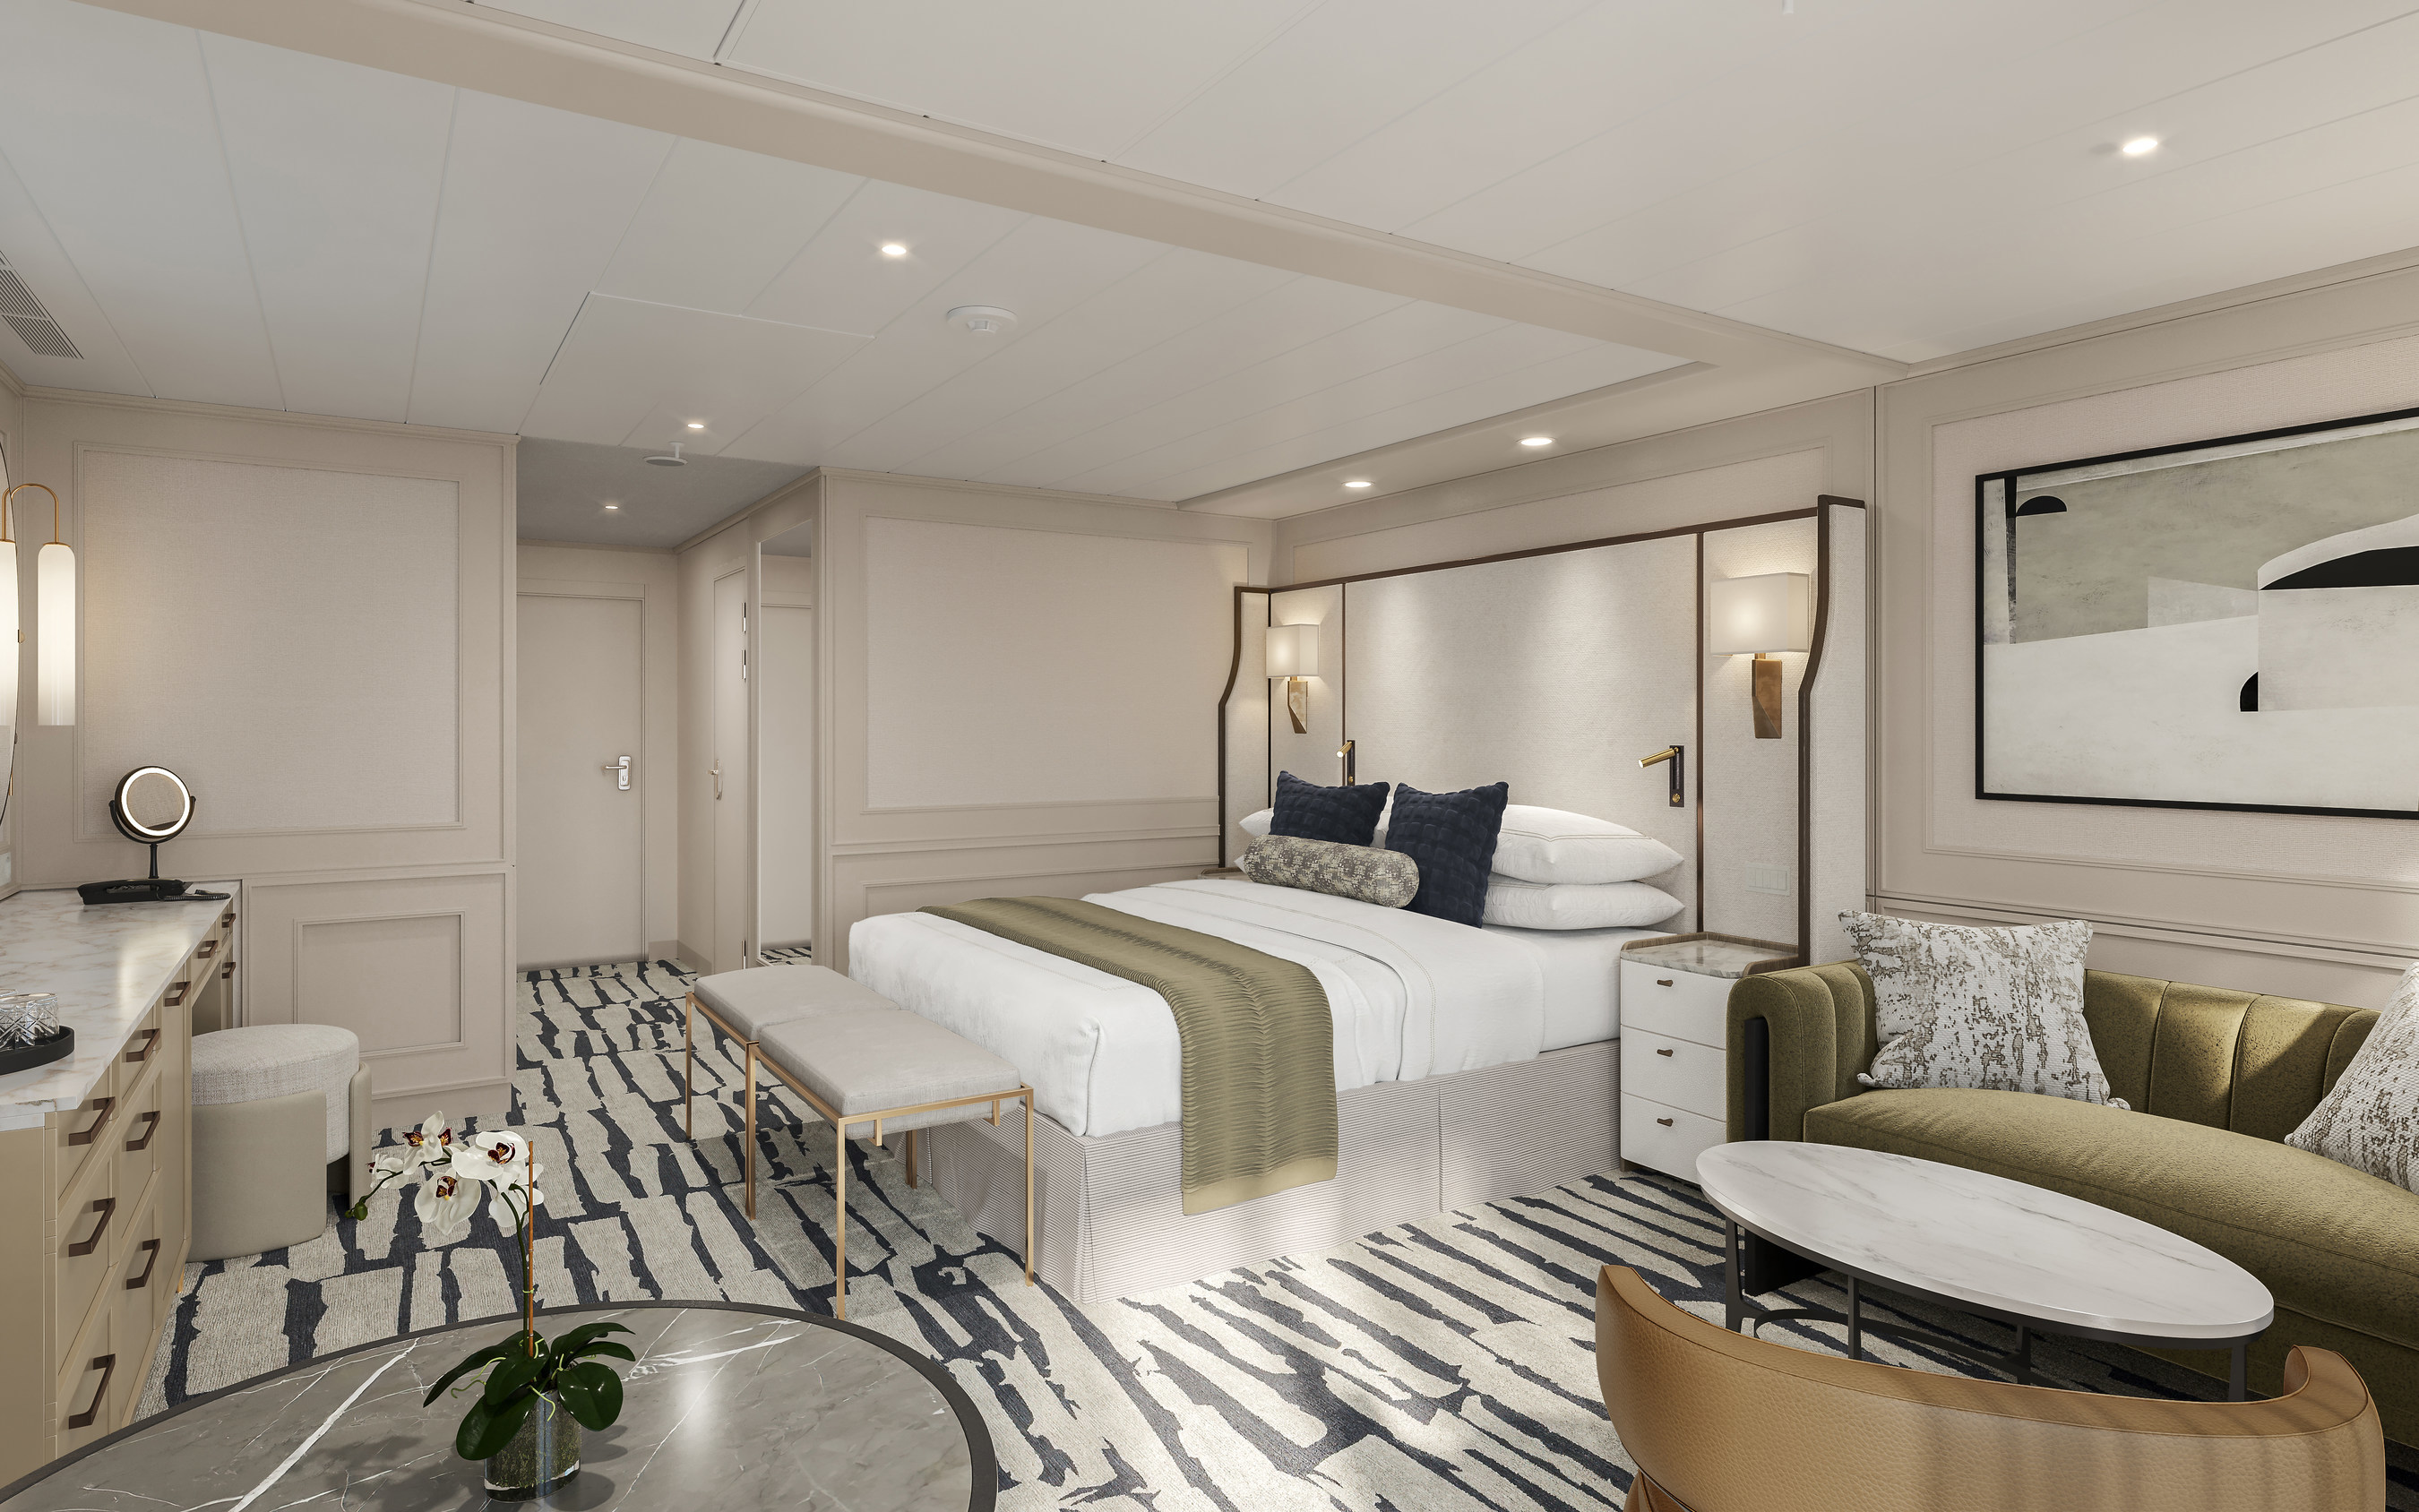 Oceania Cruises' Riviera and Marina to Undergo Stem-to-Stern Re-Inspiration in 2022 and 2023 (April 2022)